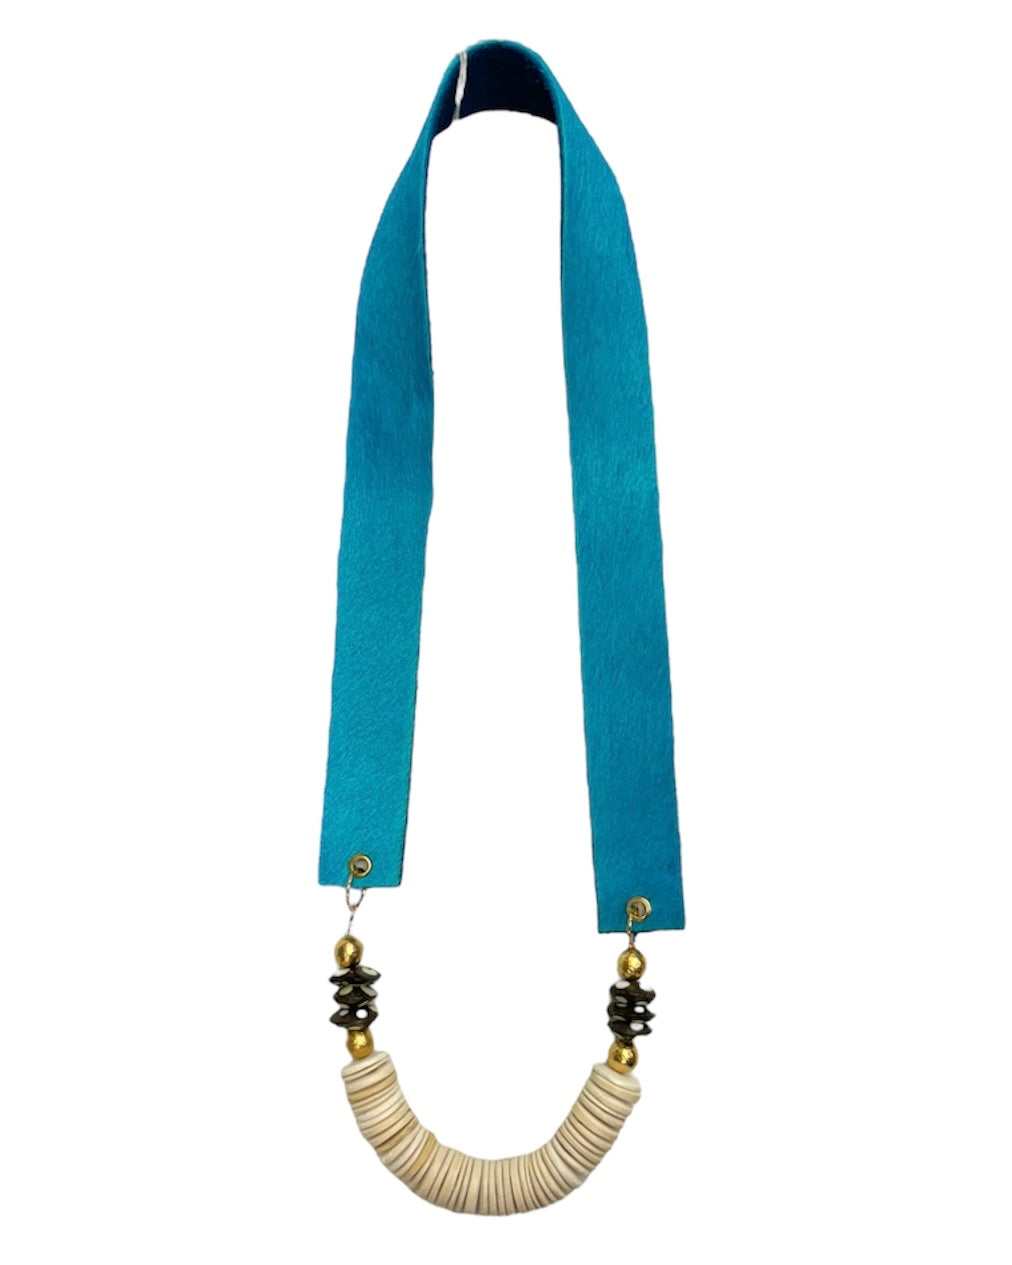 HIDE BEADED NECKLACE - Turquoise